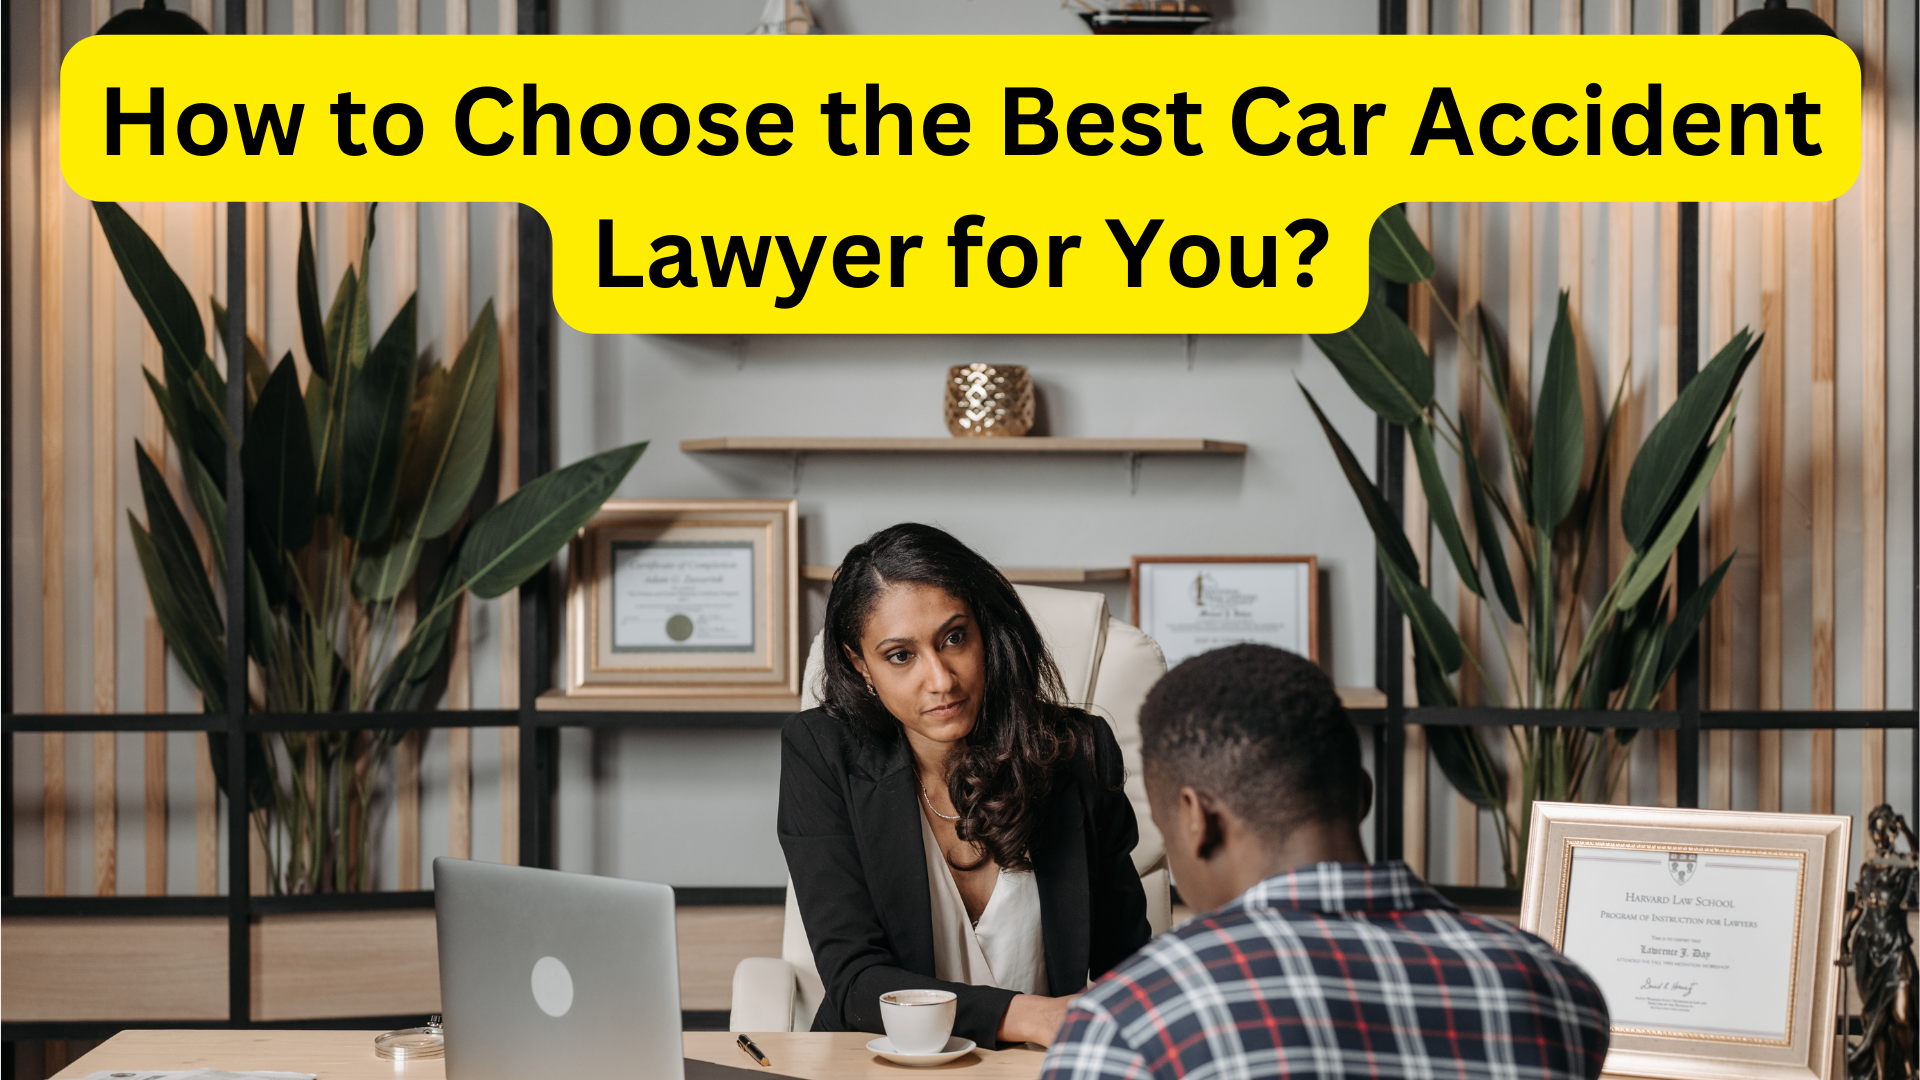 How to Choose the Best Car Accident Lawyer for You?